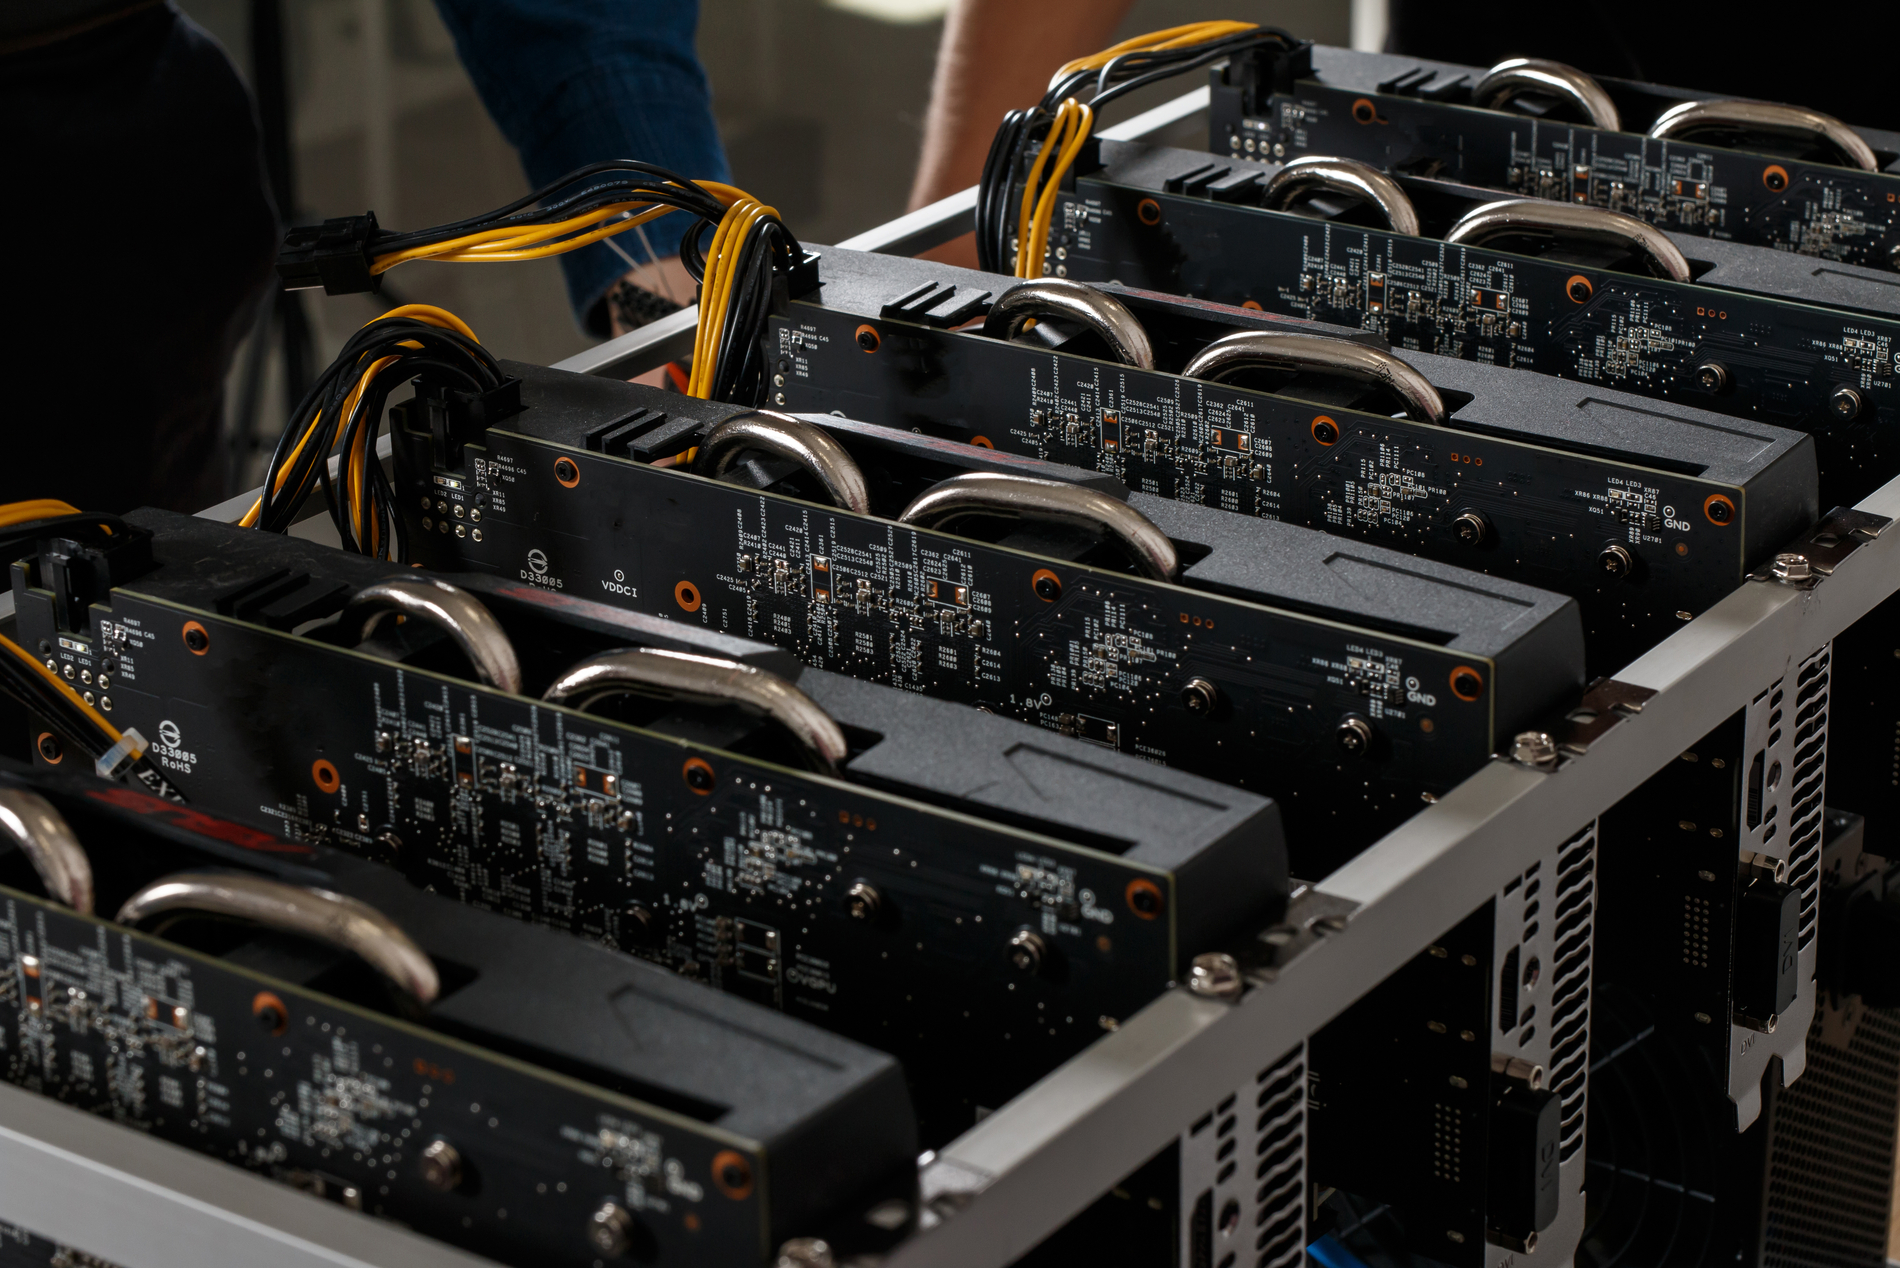 China Says Bitcoin Is Wasteful. Now It Wants to Ban Mining   WIRED